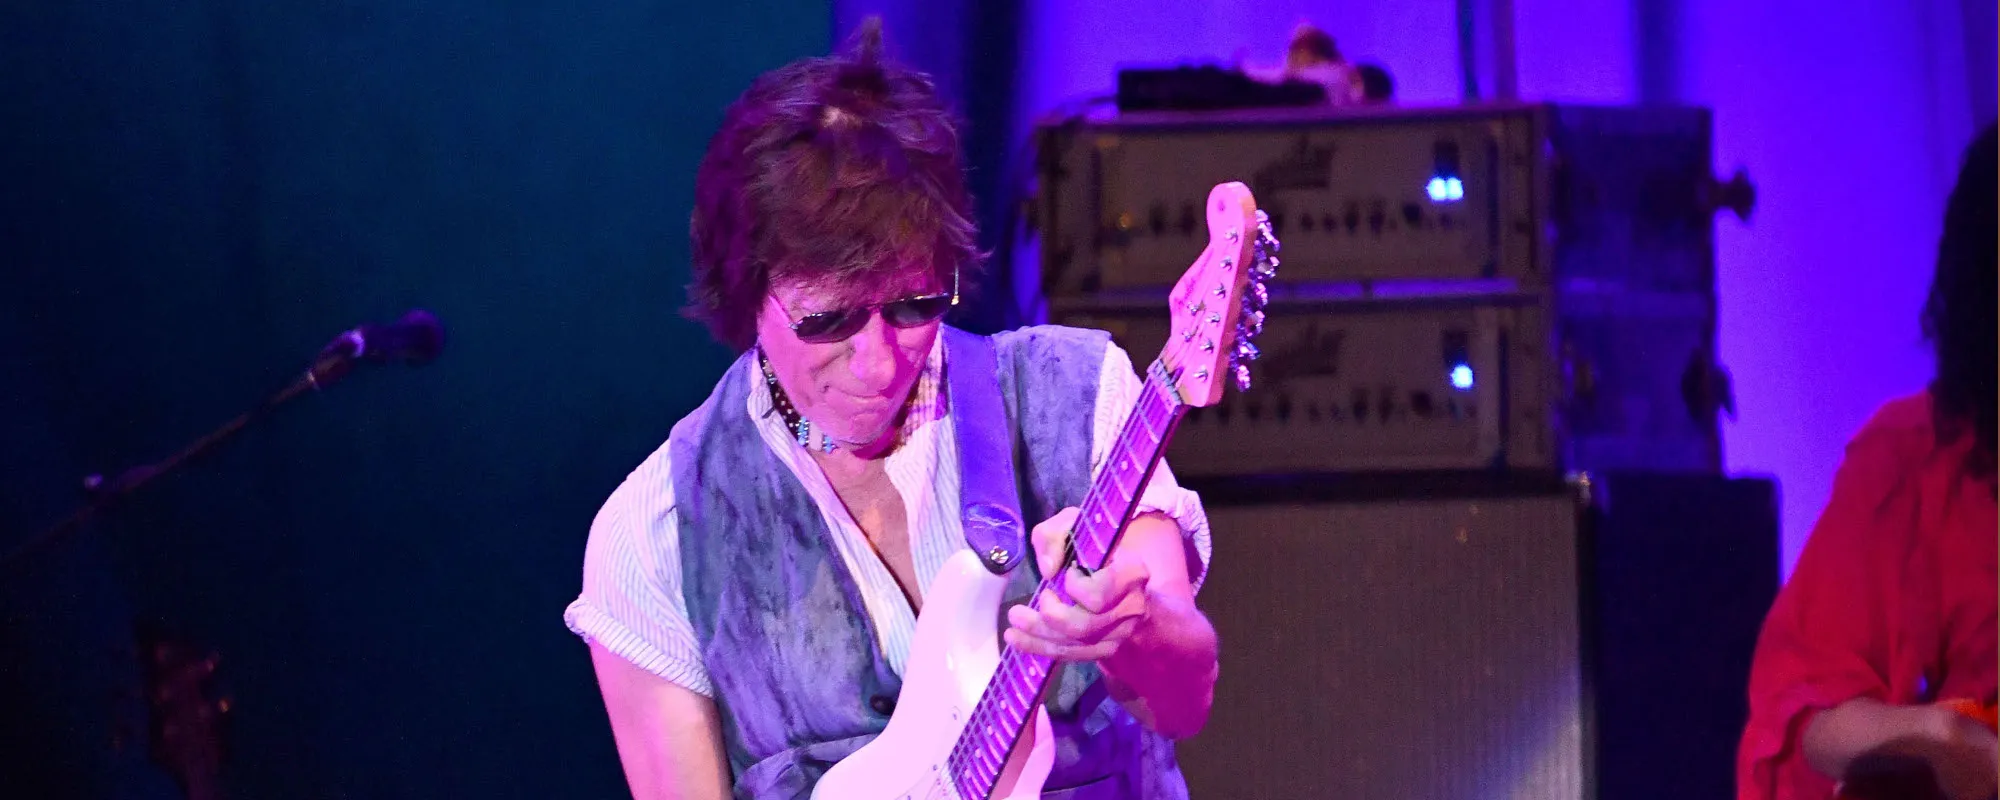 Former Bandmates Jimmy Page, Ronnie Wood, Rod Stewart, and Many More in Music Mourn Jeff Beck